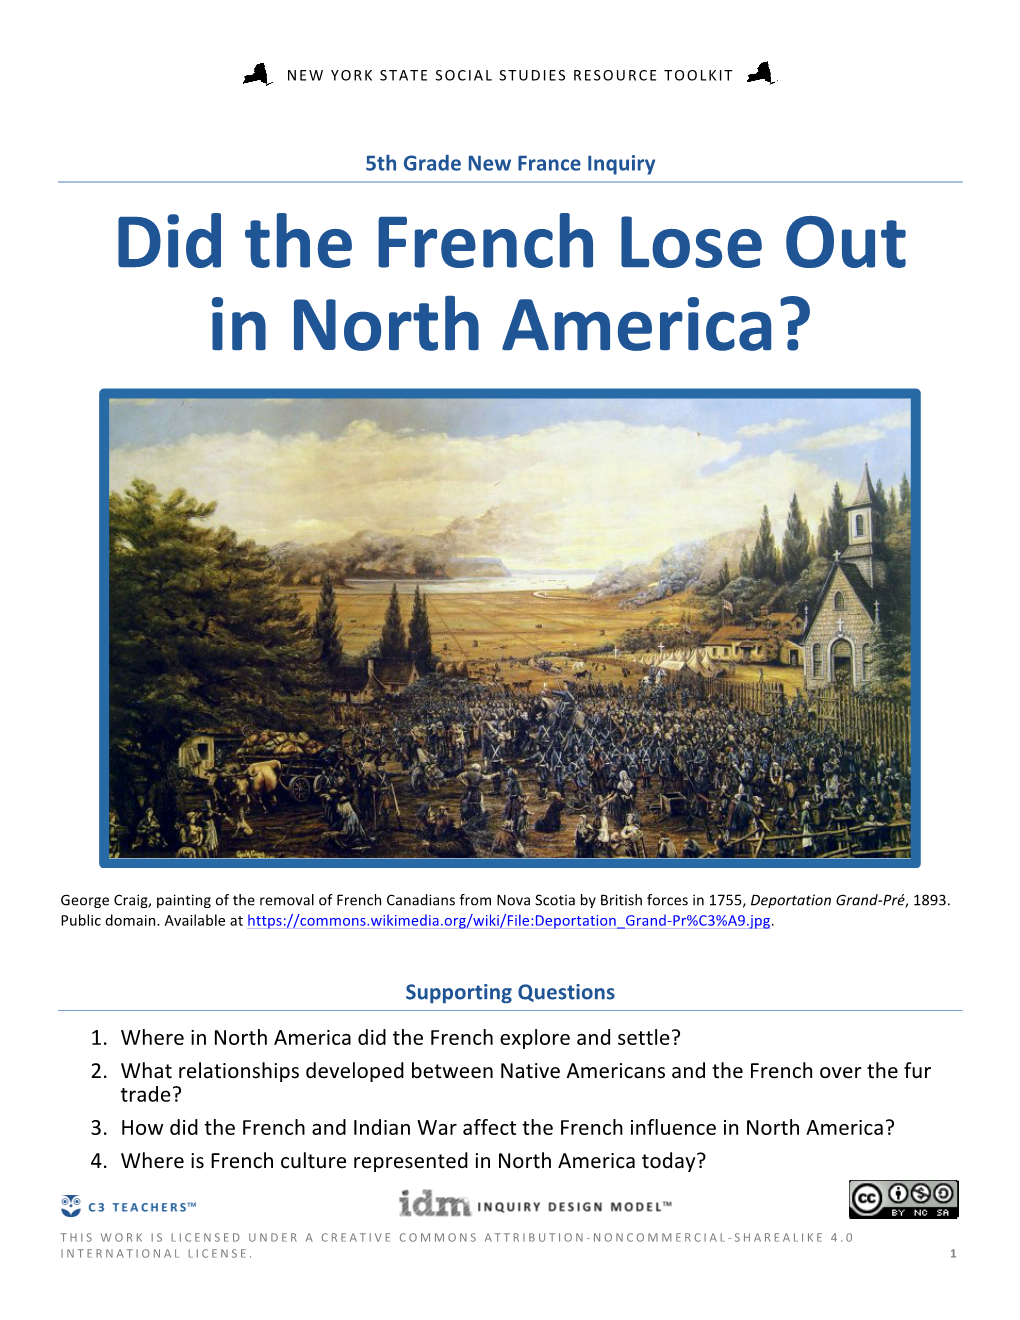 Did the French Lose out in North America?